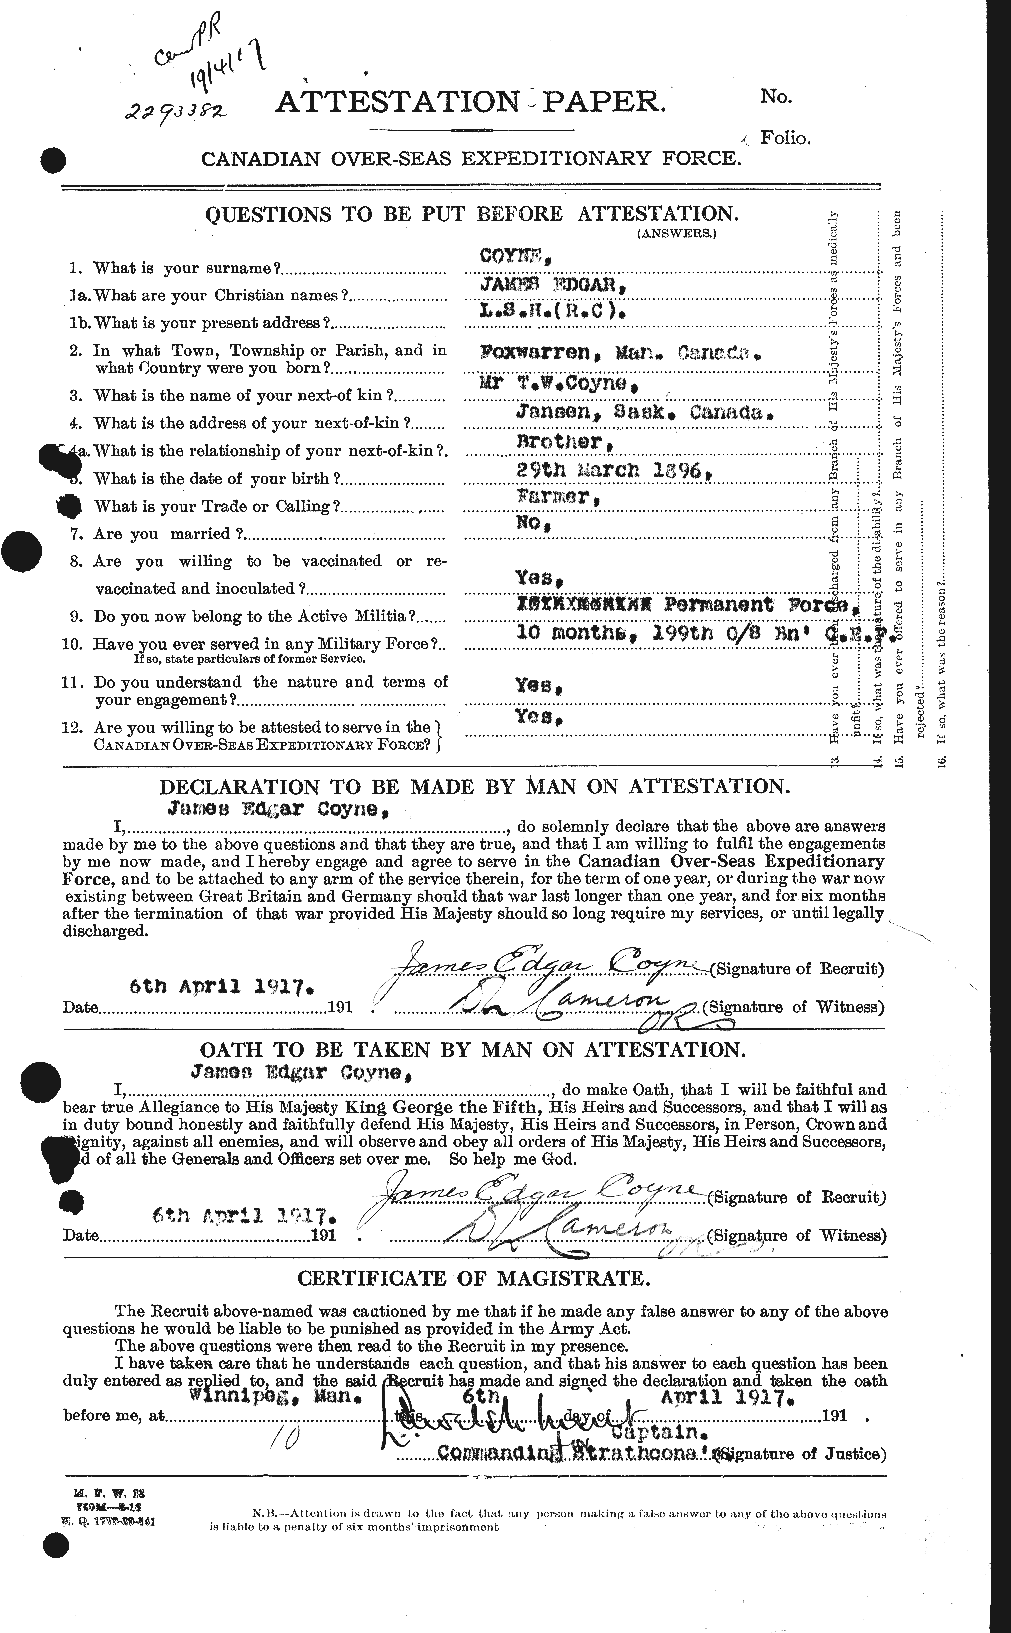 Personnel Records of the First World War - CEF 062321a